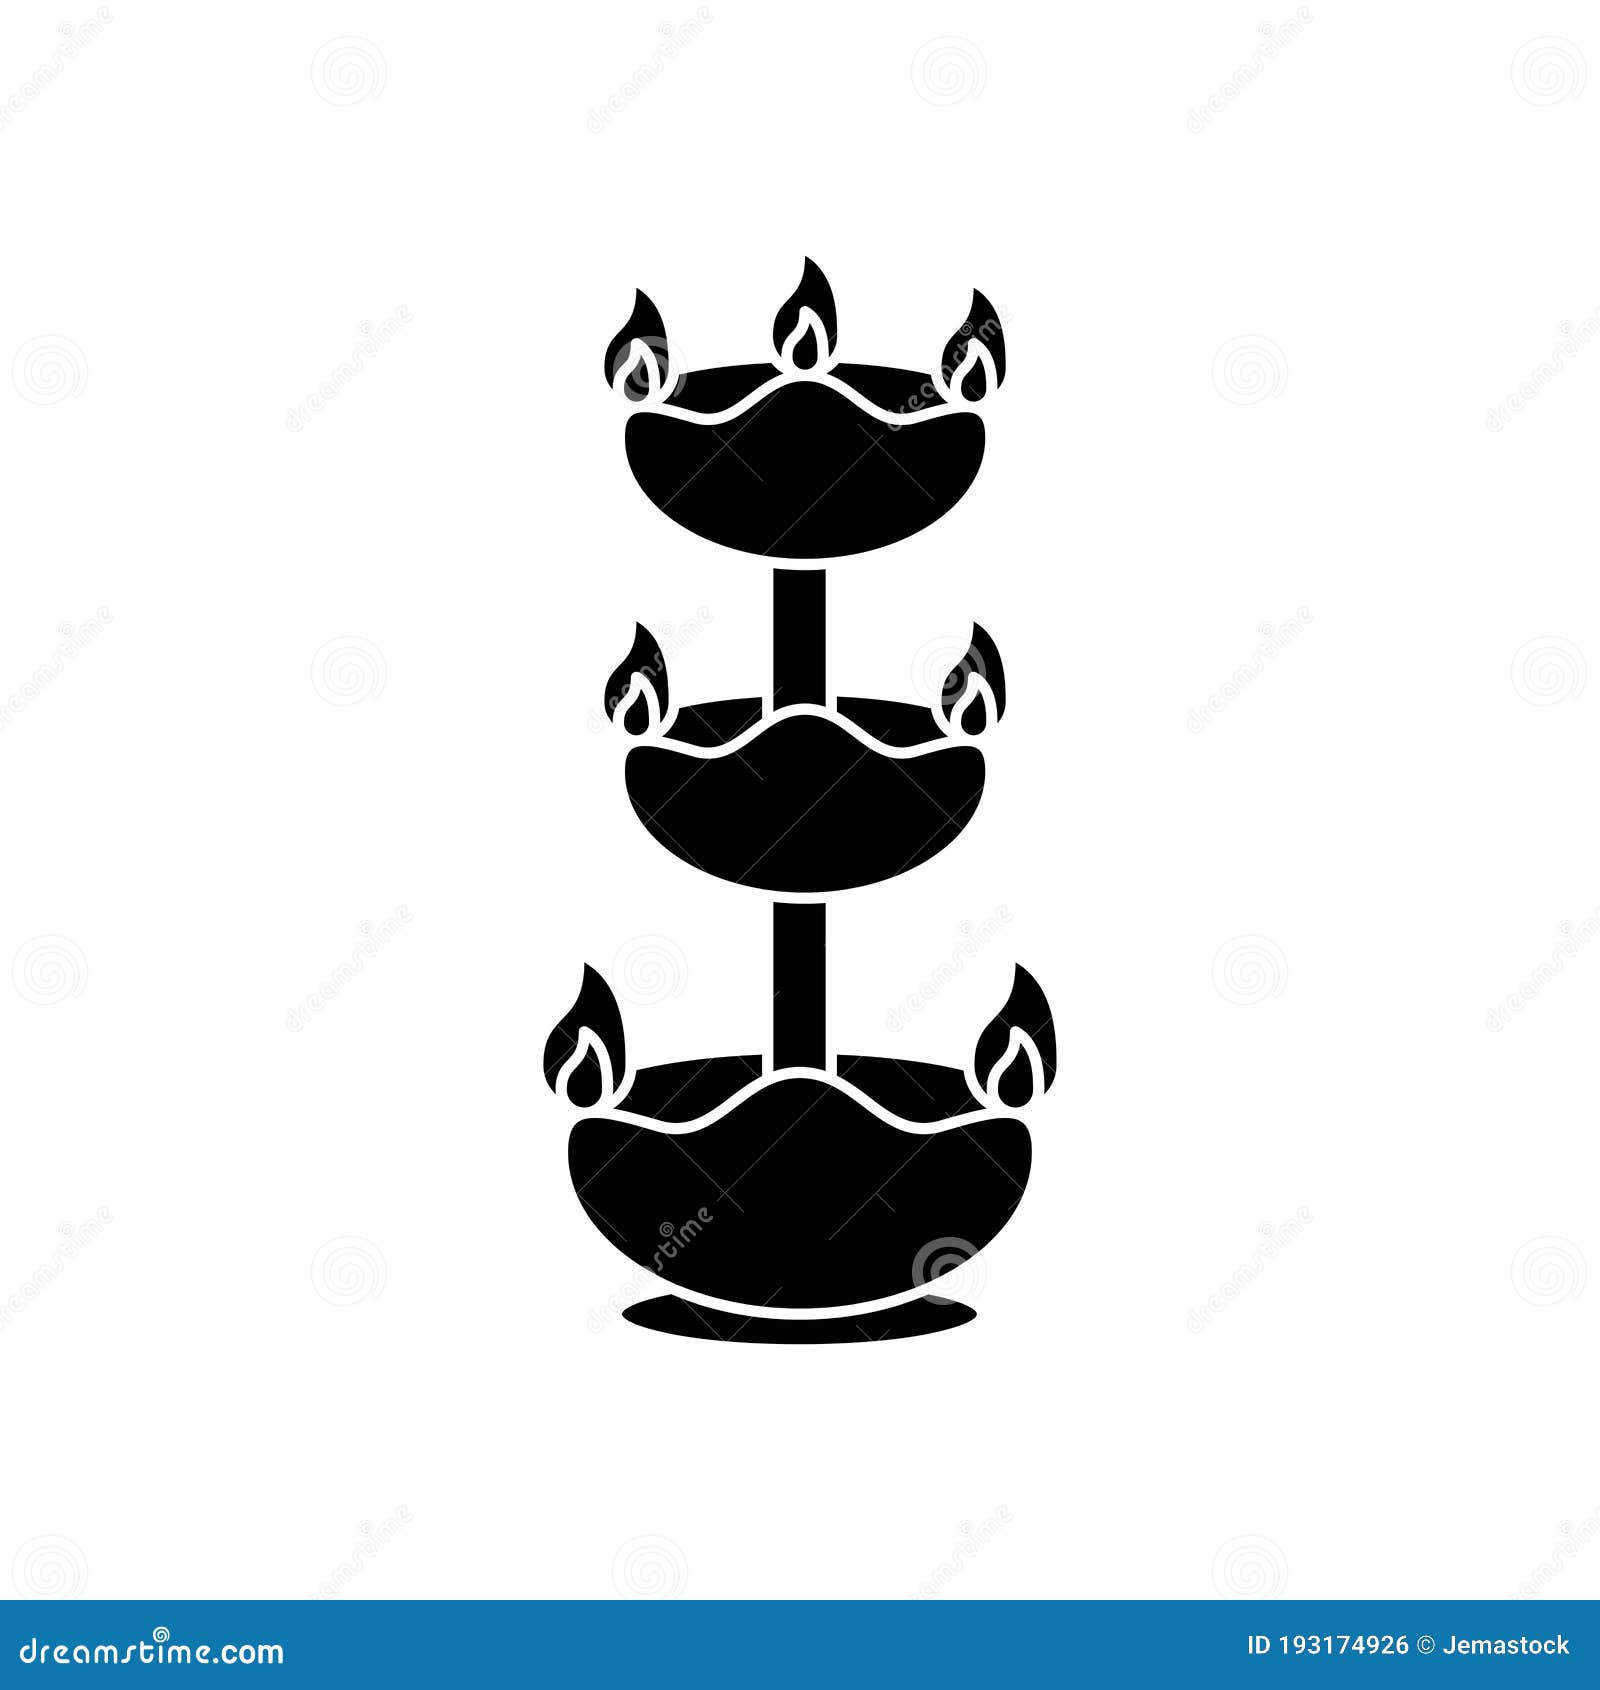 navratri fount with candles silhouette style icon